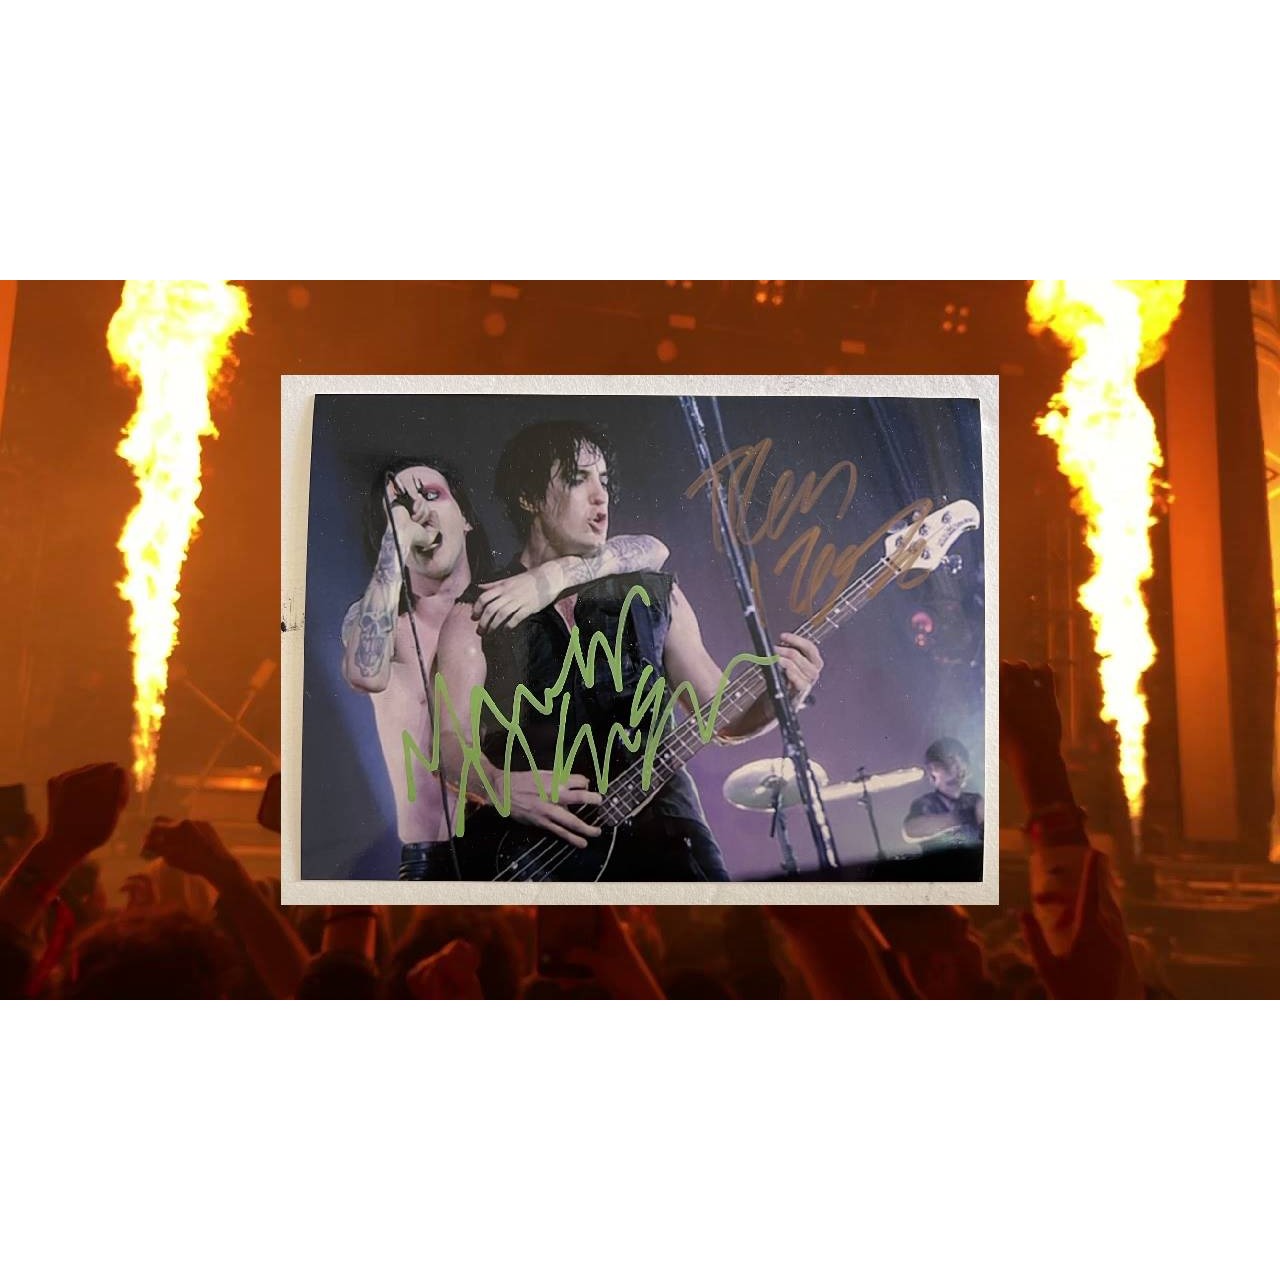 Brian Warner Marilyn Manson and Trent Reznor 5x7 photo signed with proof